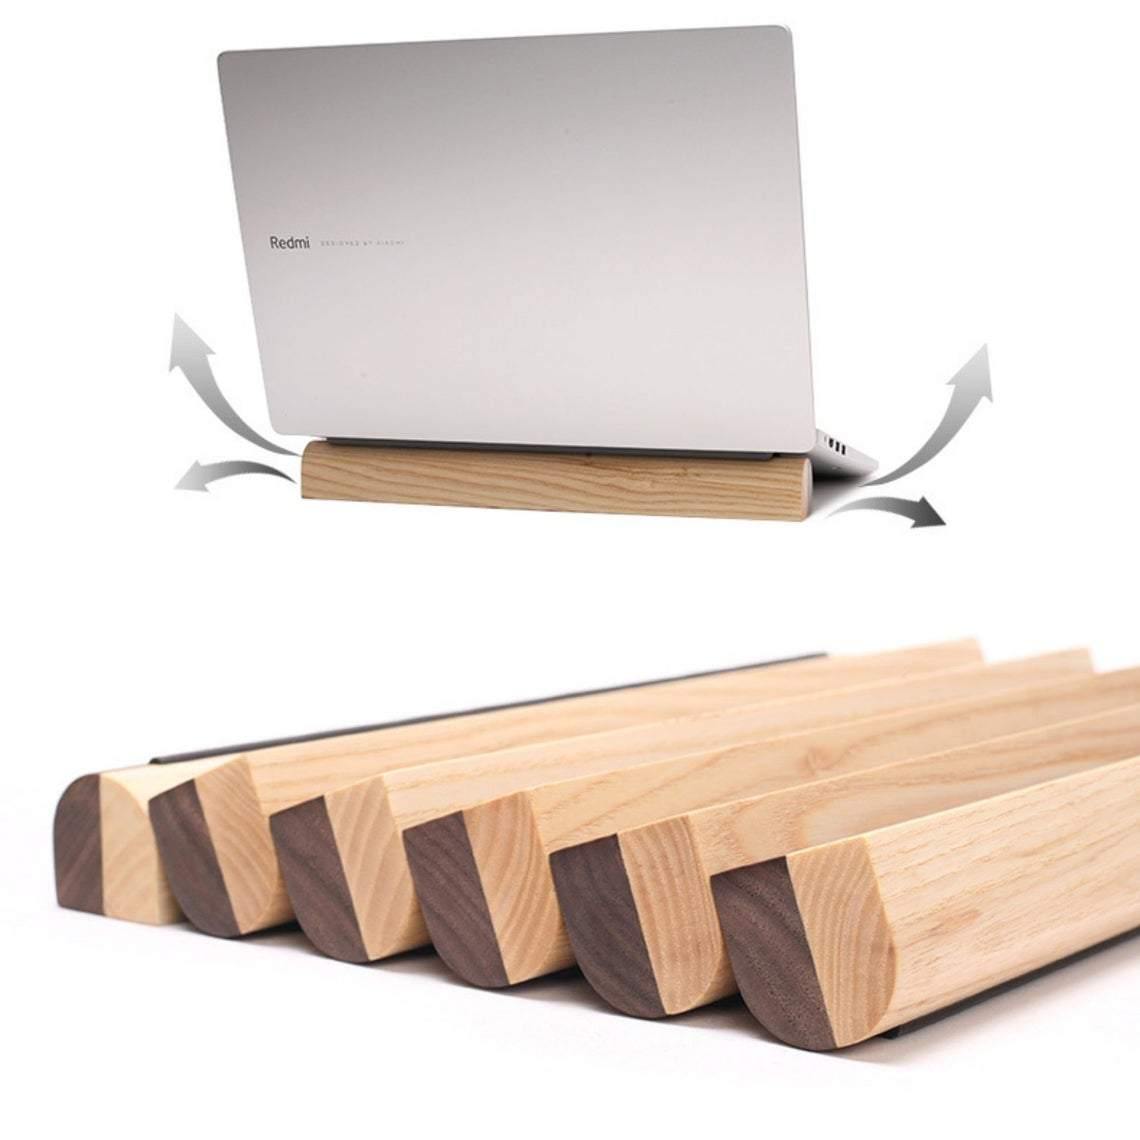 Portable laptop stand wood for table, wooden lap stand, slim laptop holder, wooden laptop stand, wooden macbook stand, laptop stand, Geek gift